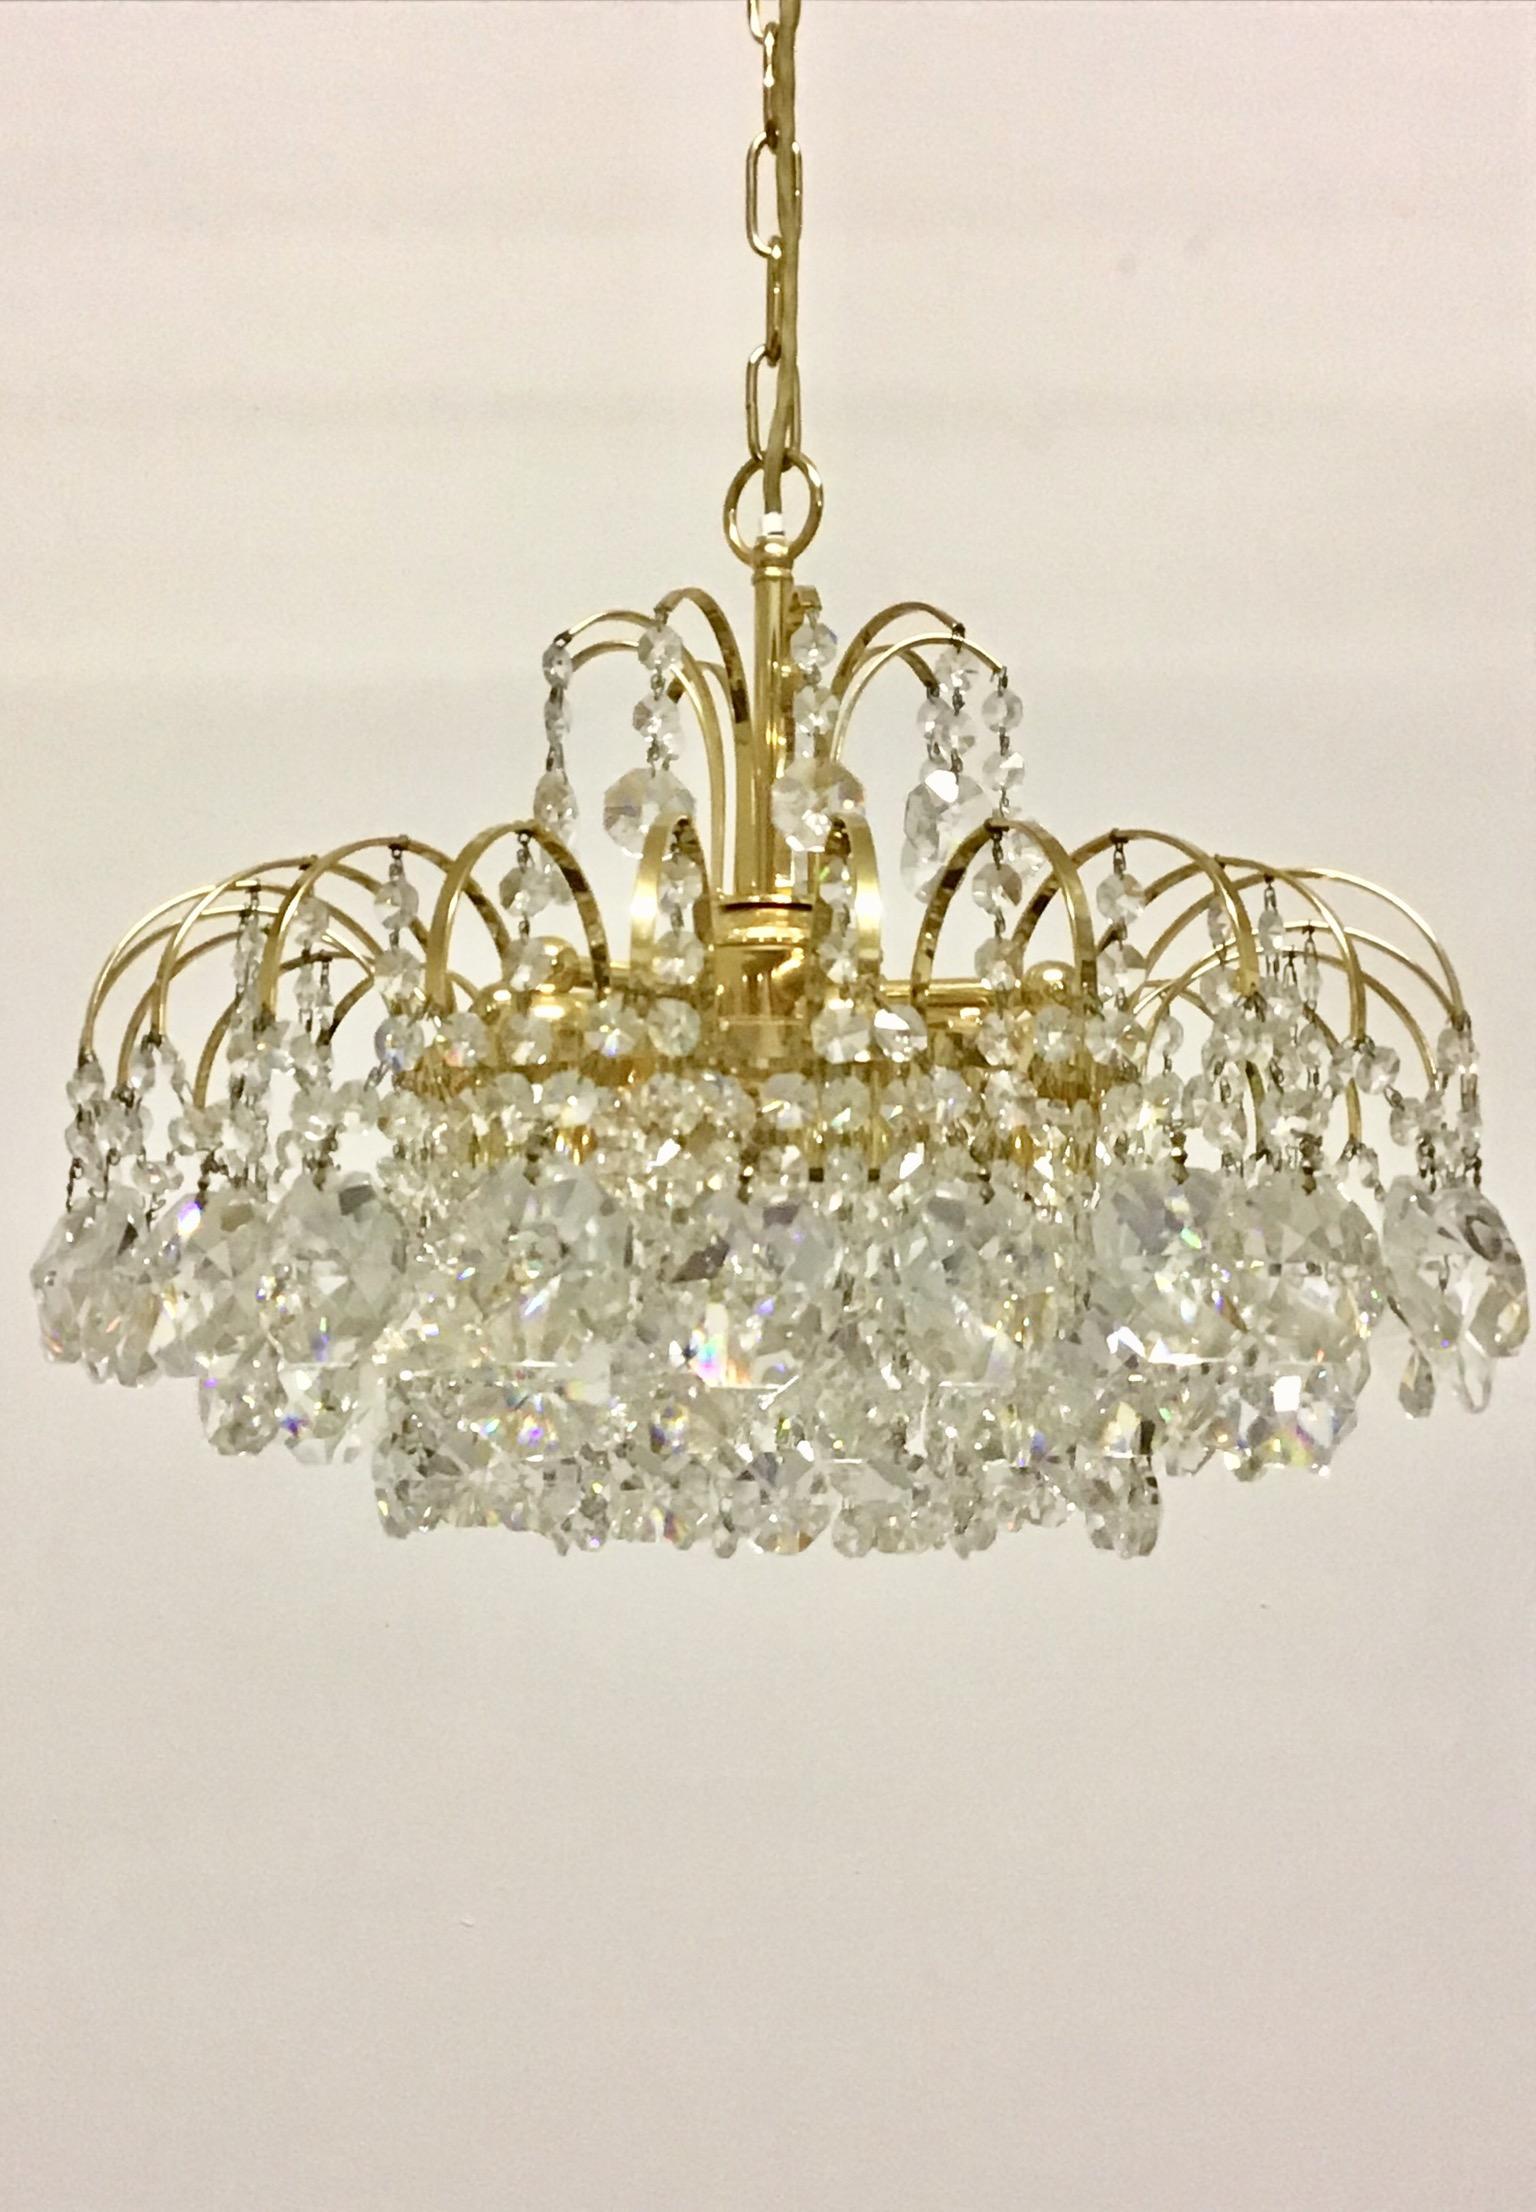 A mid -century high quality six-light gilt brass and Swarovski crystal chandelier, Germany, circa 1960s.
Socket: Six e 14 (Edison) for standard screw bulbs.
Excellent condition.